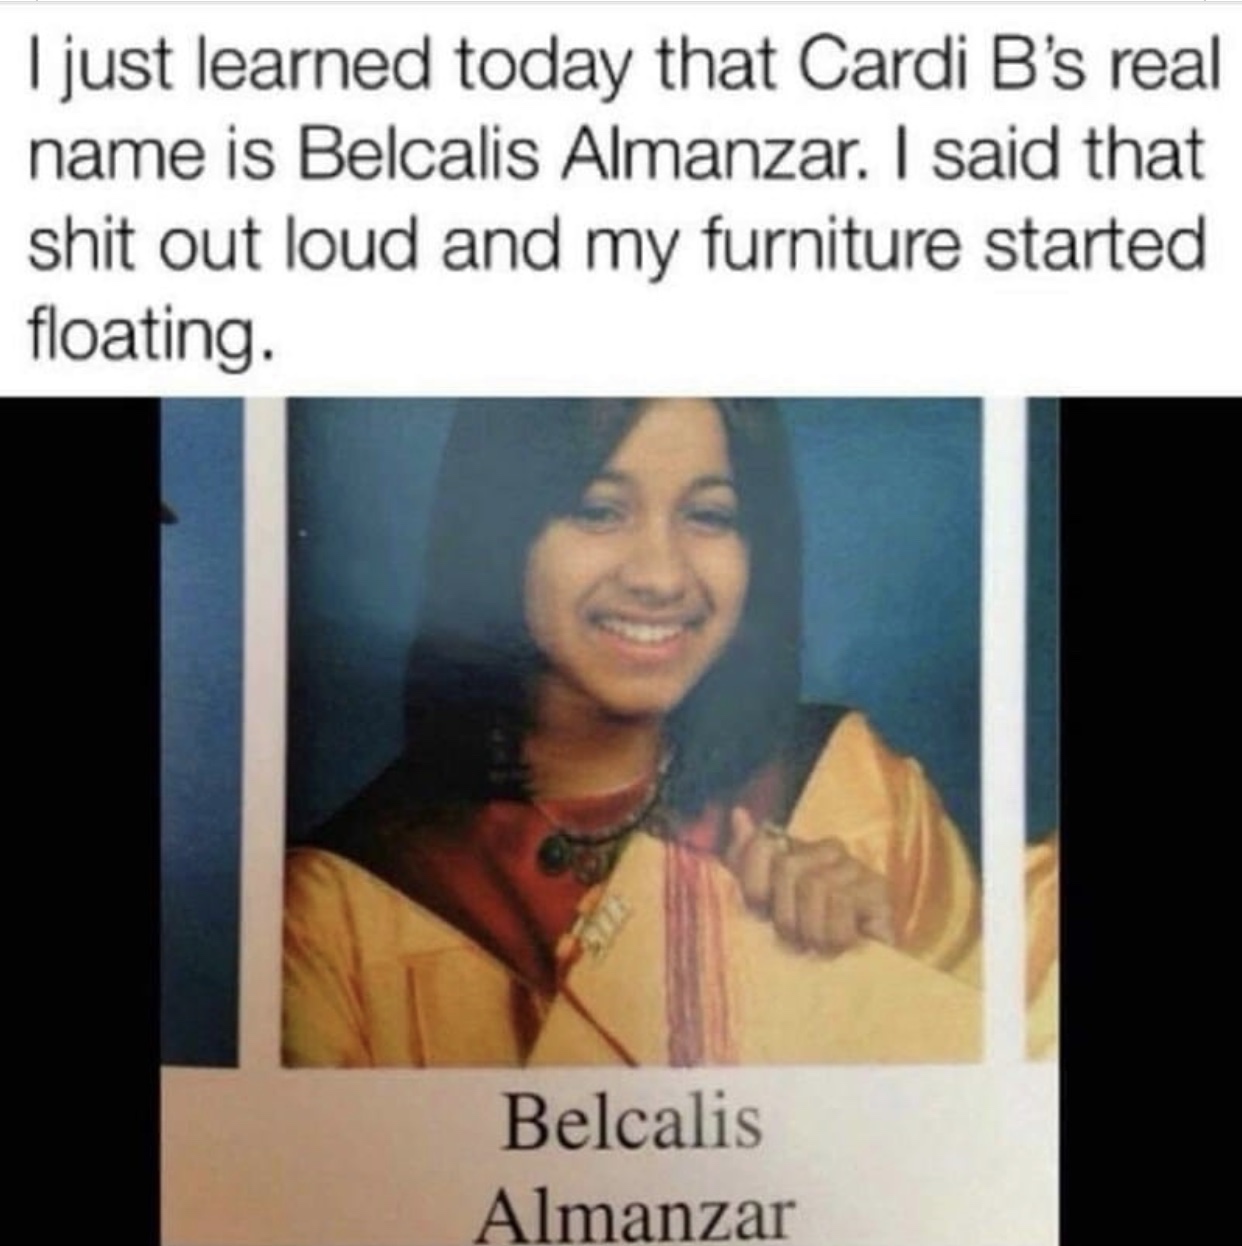 cardi b's real name meme - I just learned today that Cardi B's real name is Belcalis Almanzar. I said that shit out loud and my furniture started floating. Belcalis Almanzar